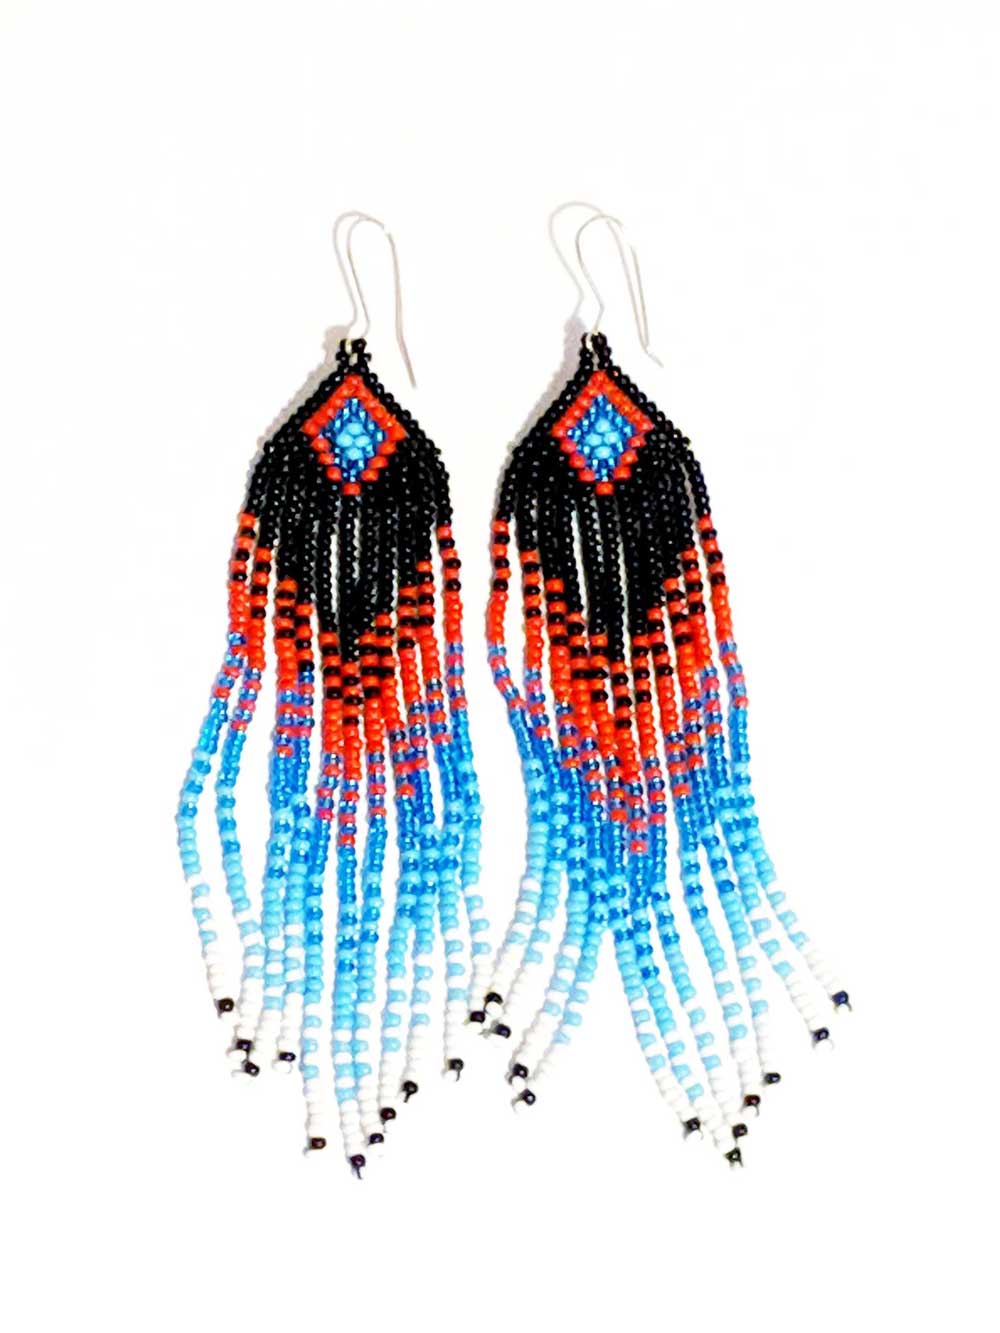 Traditional North American Earrings